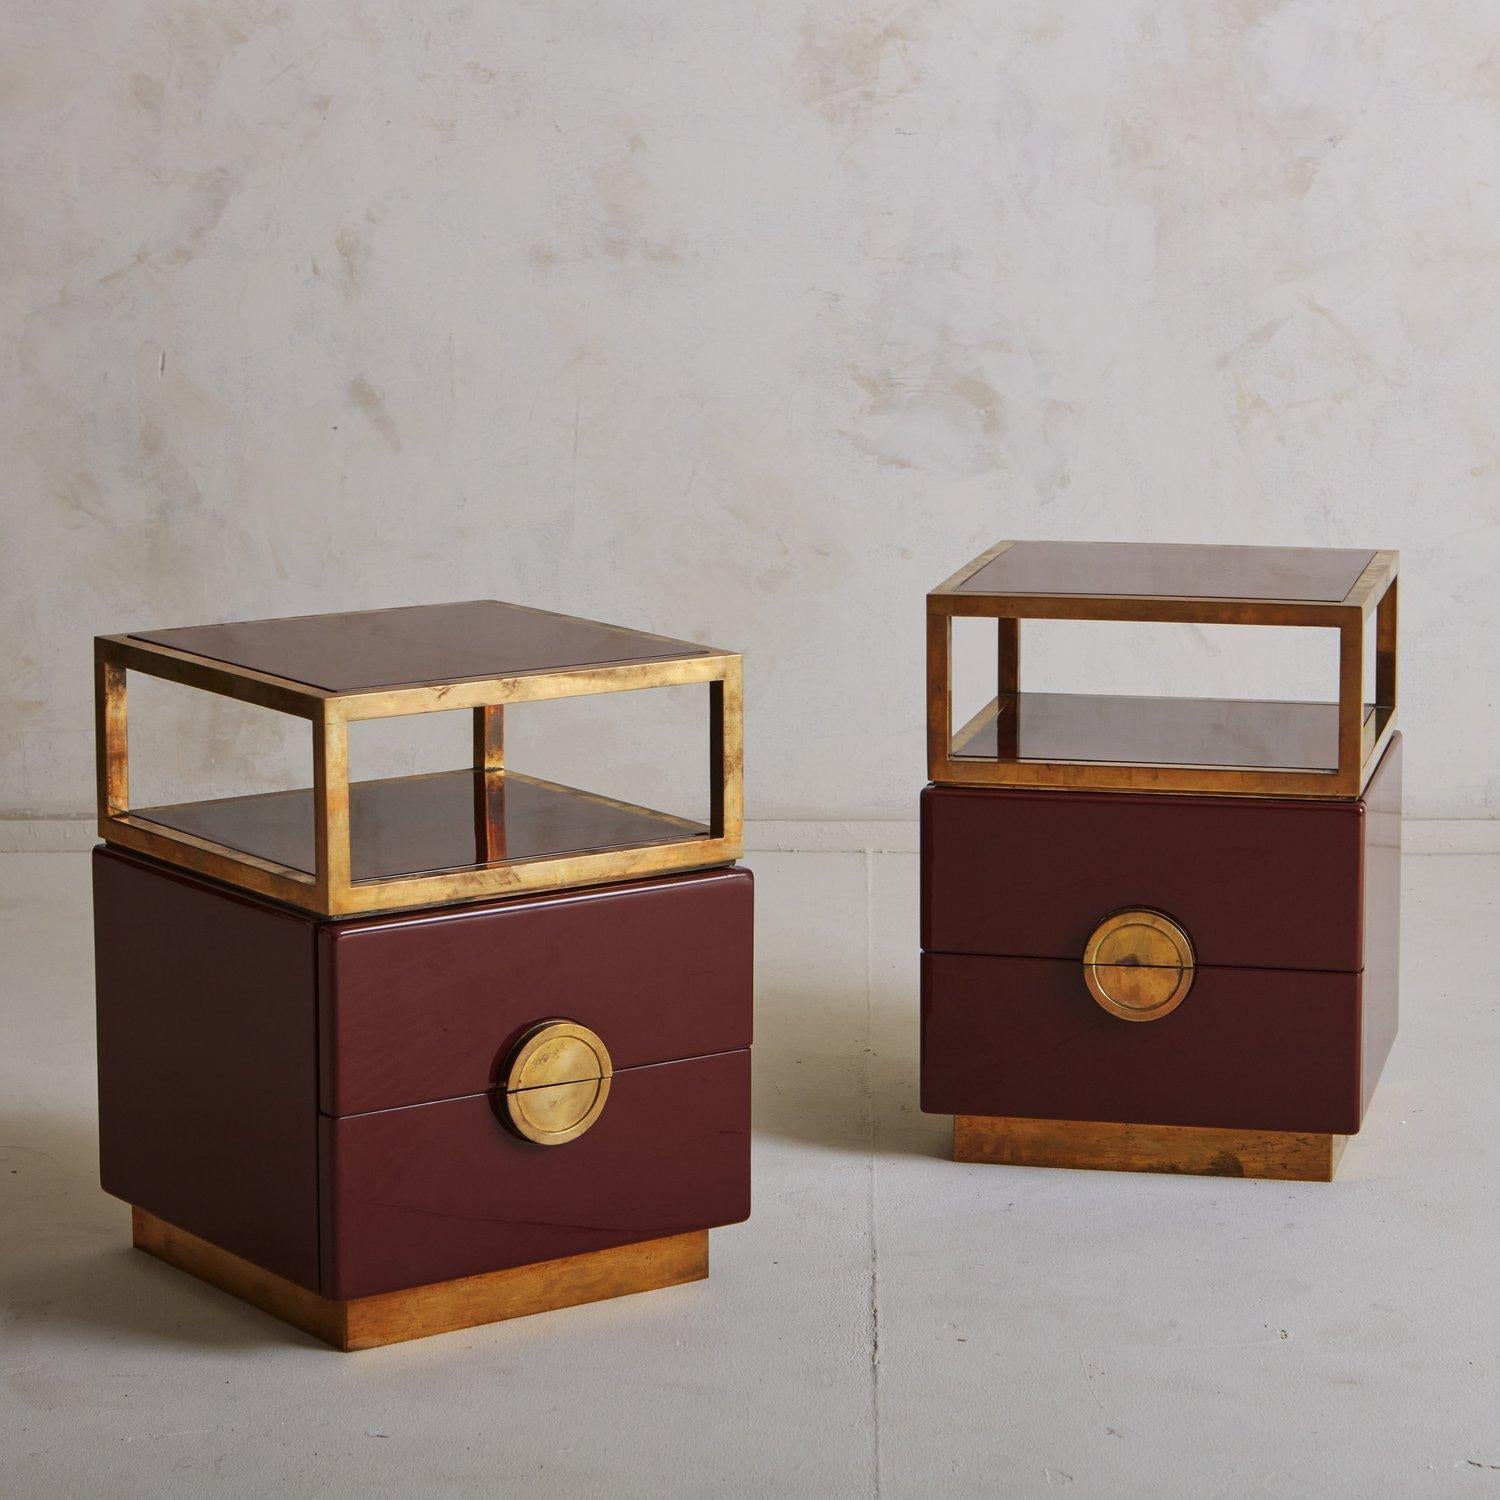 A pair of French end tables featuring a beautiful burgundy lacquered finish with patinated brass detailing and plinth bases. These tables have two drawers with demilune brass pulls and an open upper shelf perfect for styling books and trinkets.